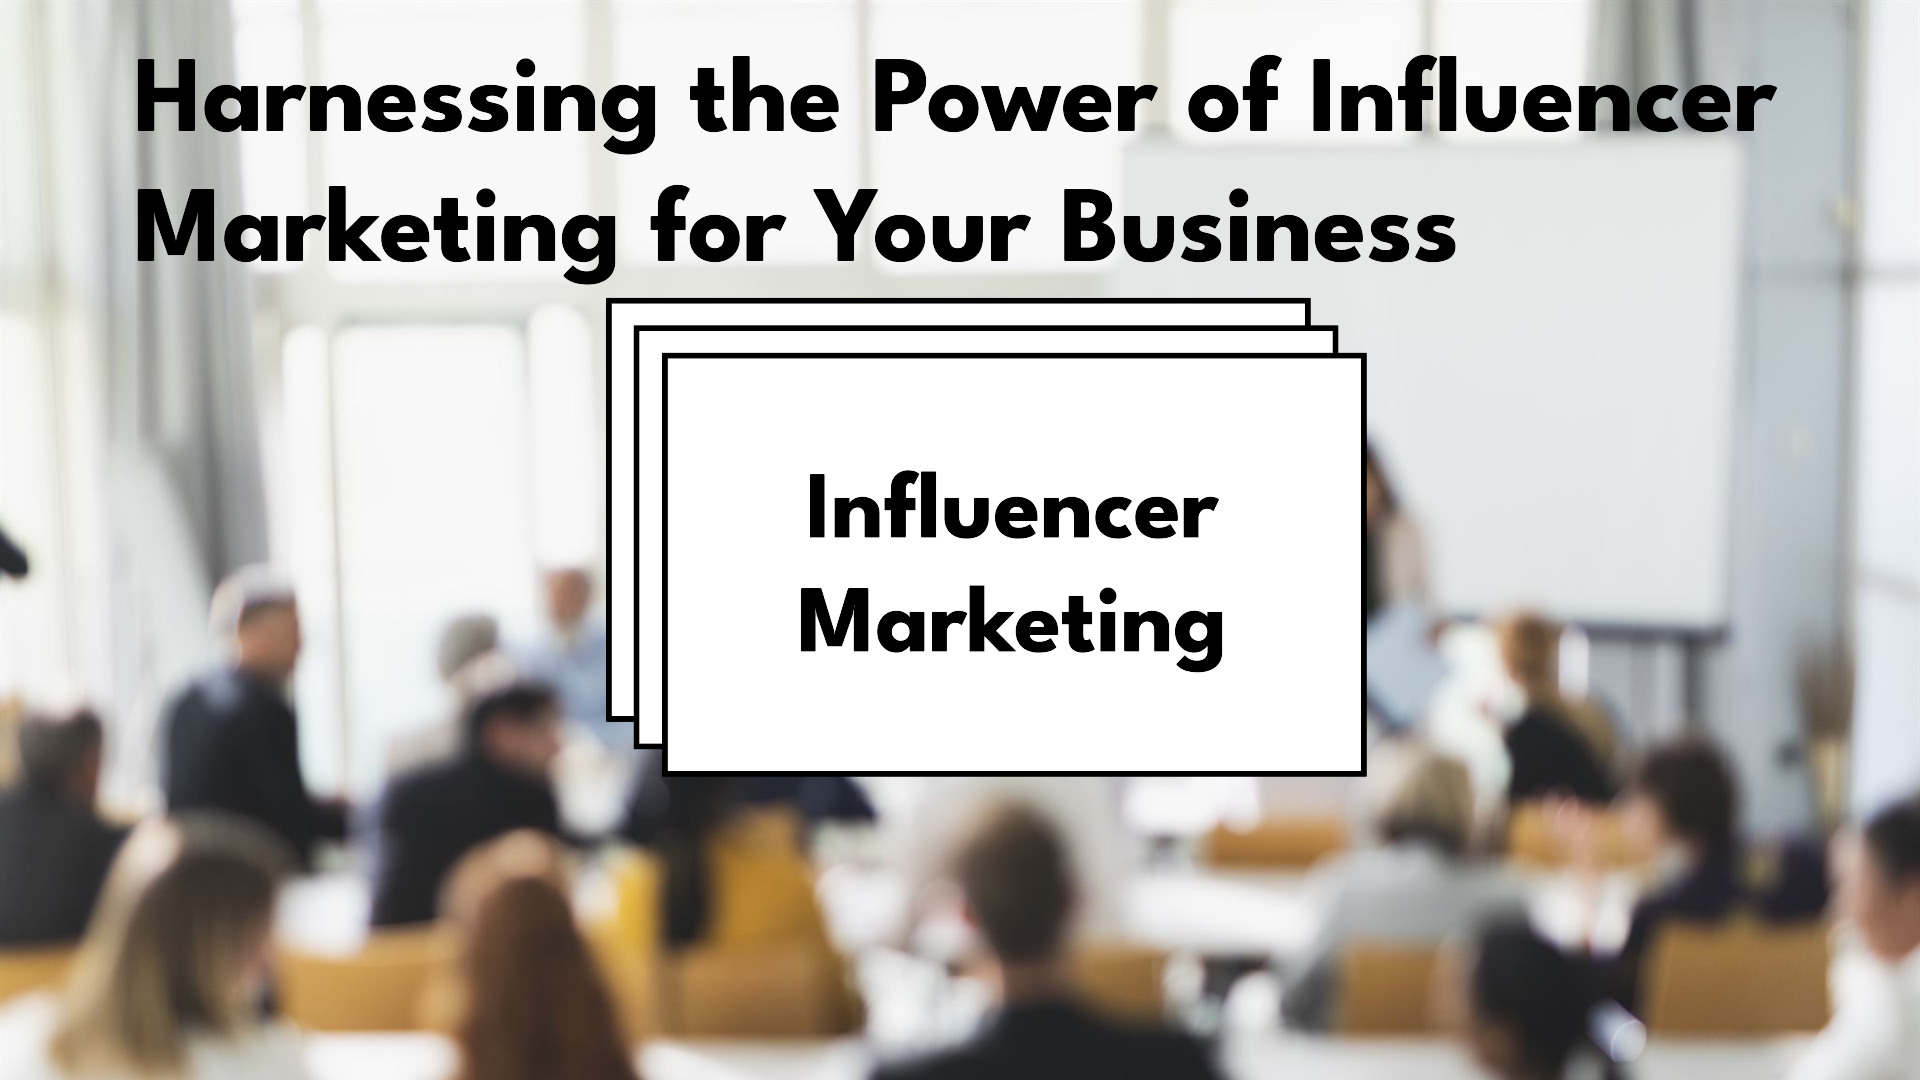 Harnessing the Power of Influencer Marketing for Your Business